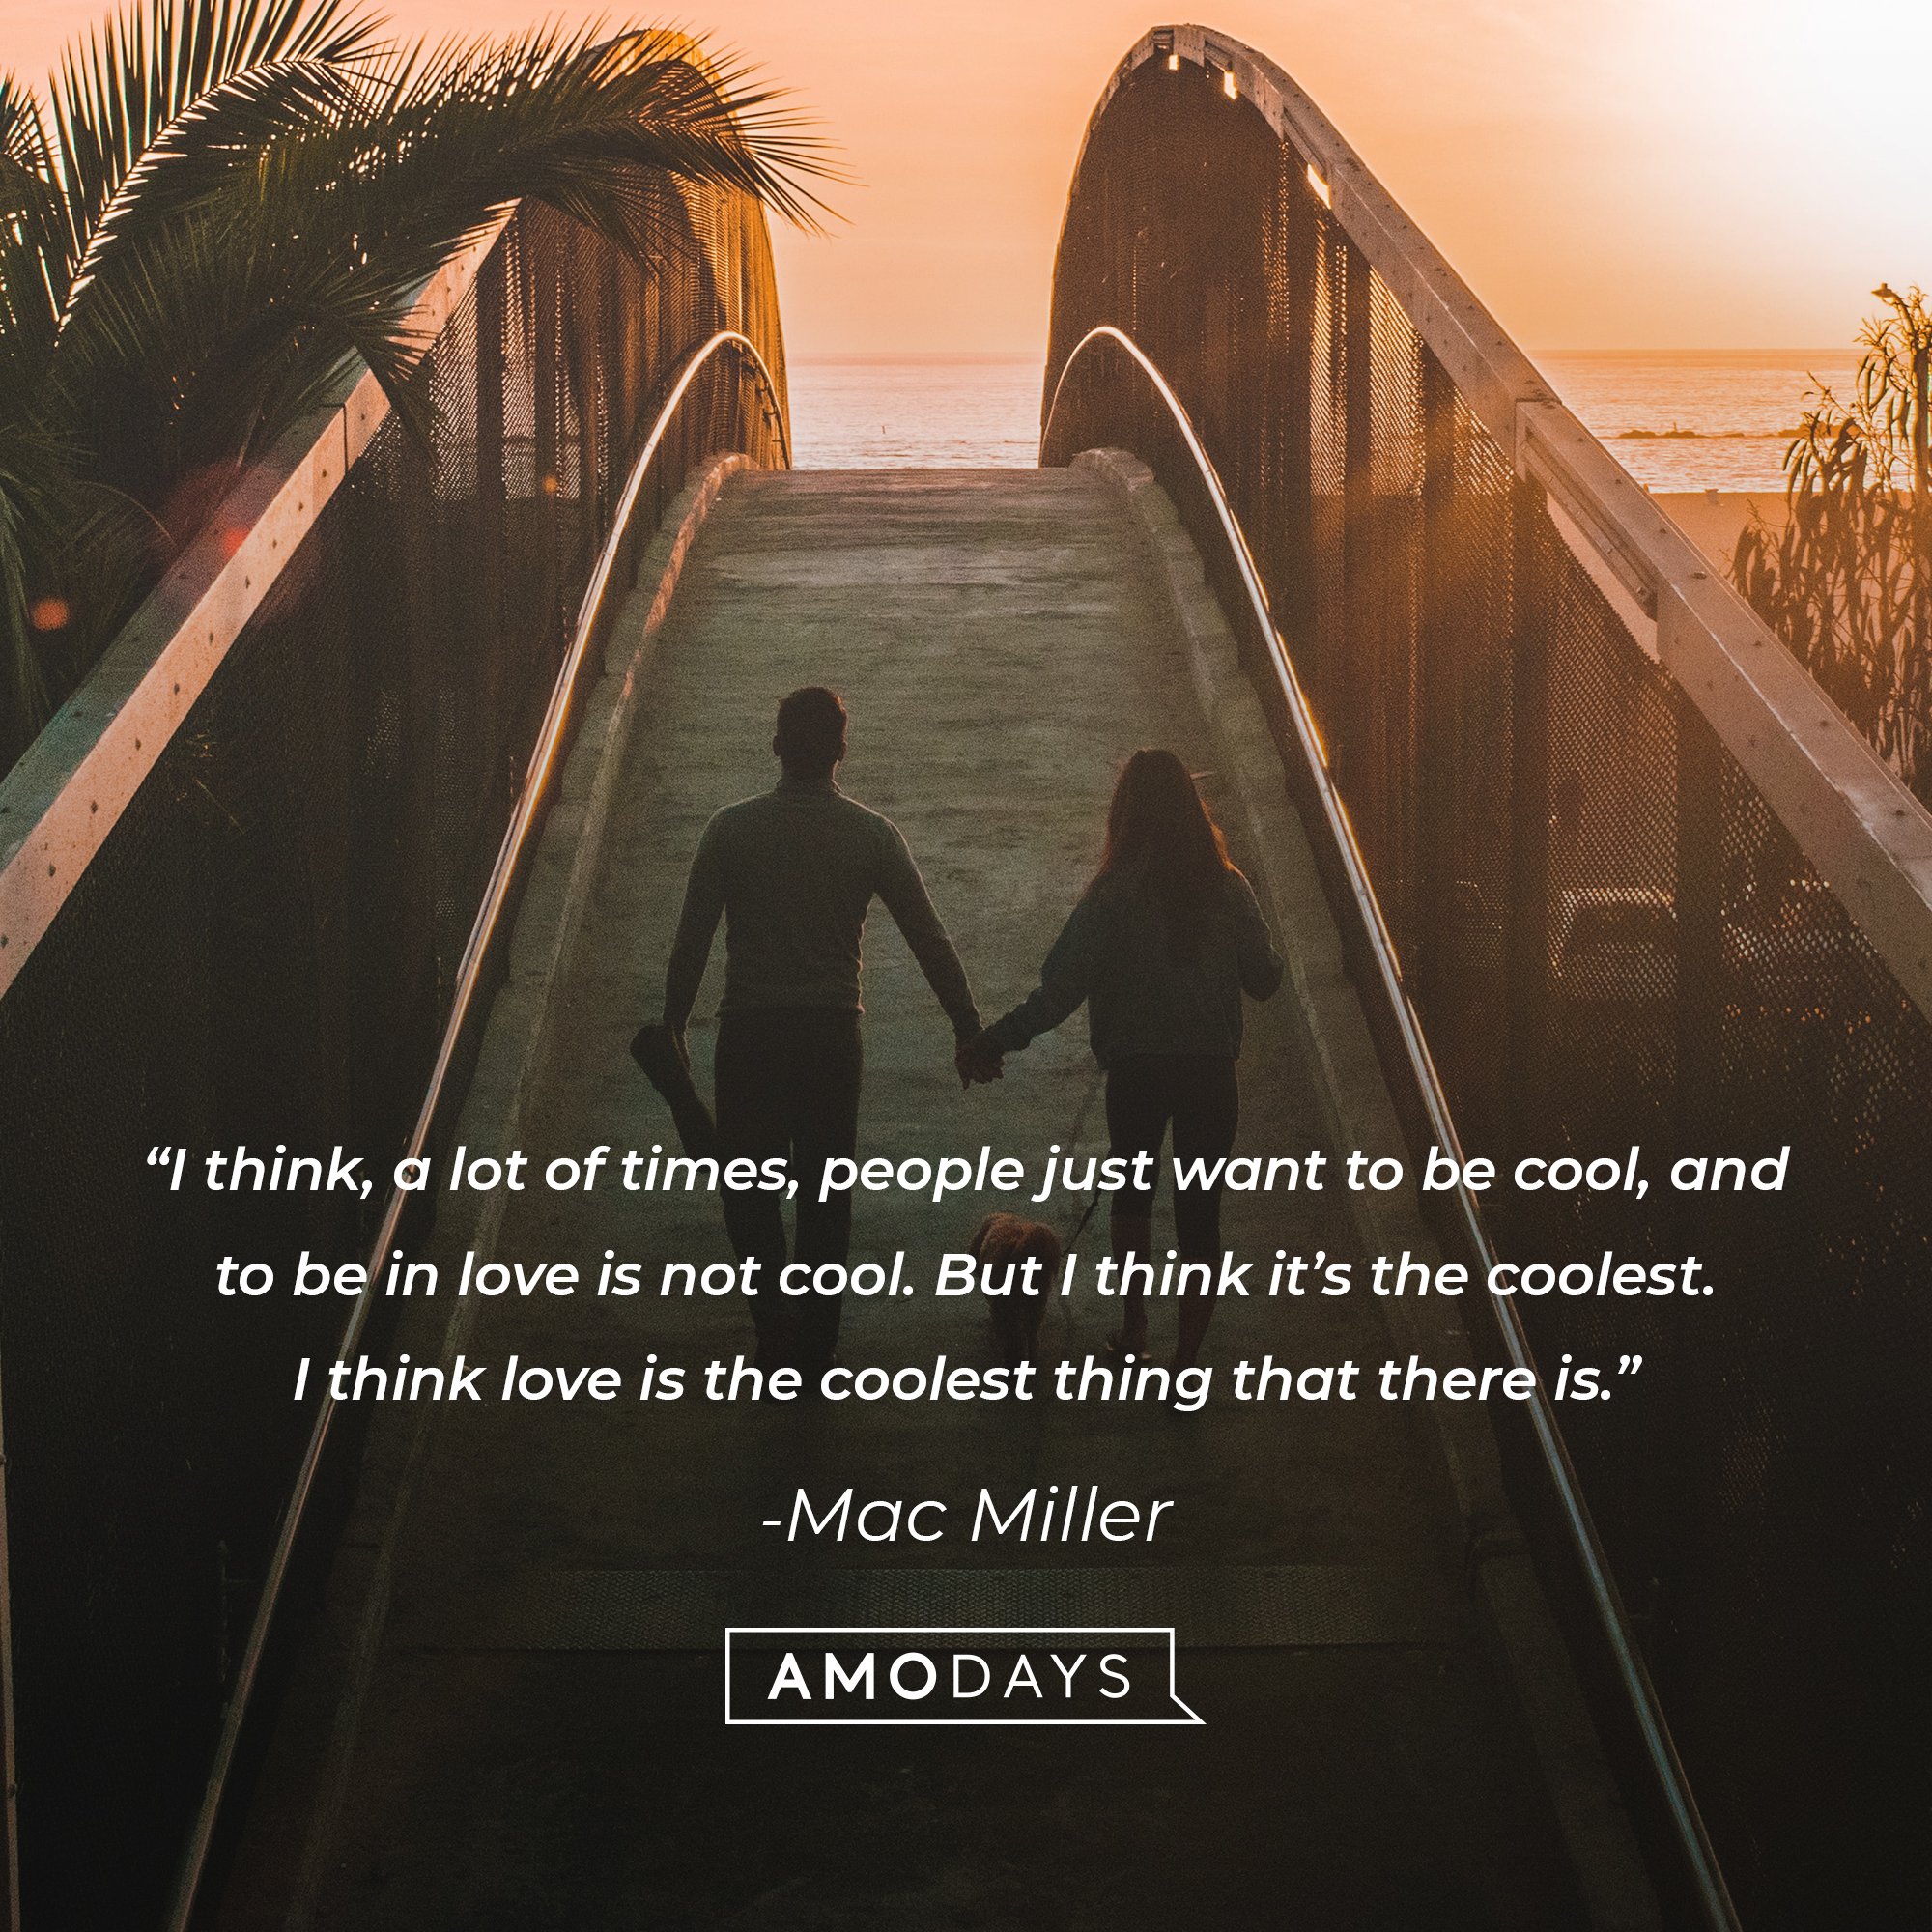  Mac Miller‘s quote: “I think, a lot of times, people just want to be cool, and to be in love is not cool. But I think it’s the coolest. I think love is the coolest thing that there is.”│Image: AmoDays